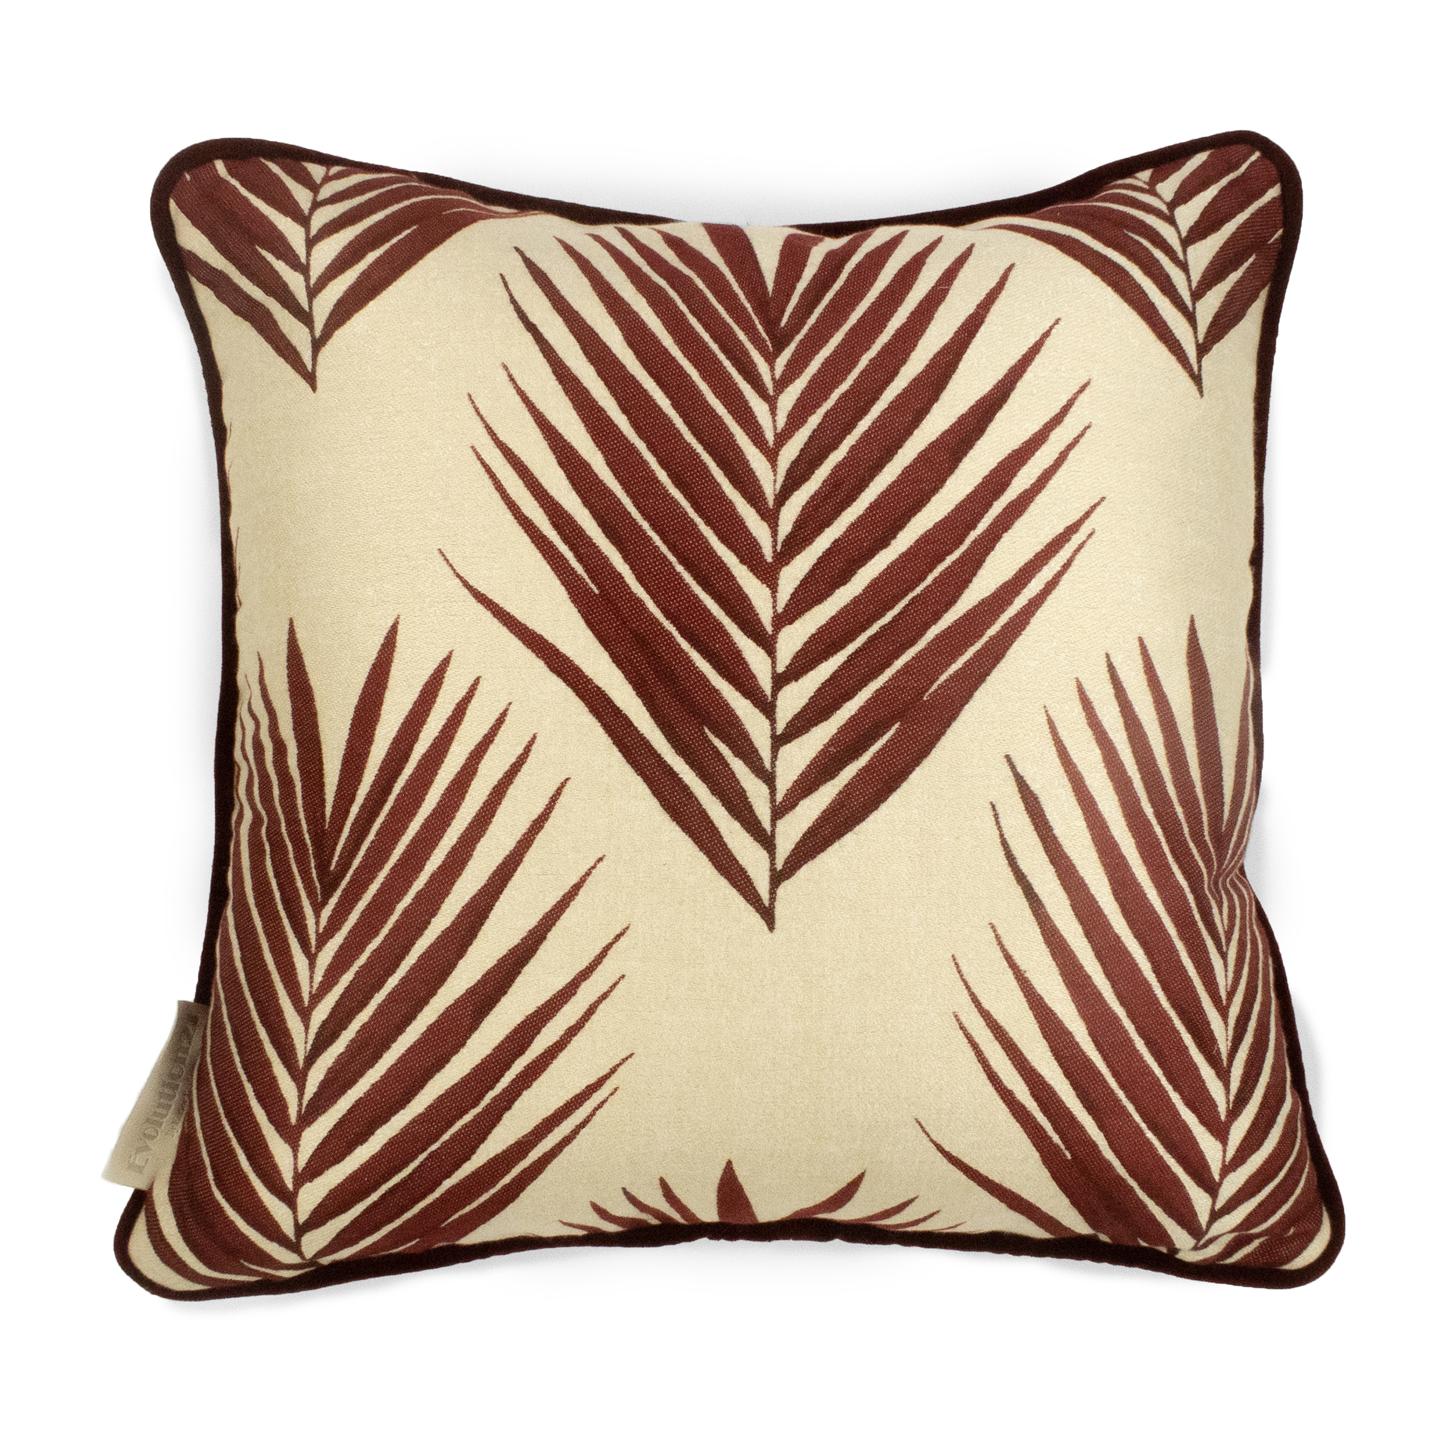 Modern Cushion / Pillow Patterned Bamboo Leaf Red by Evolution21 For Sale